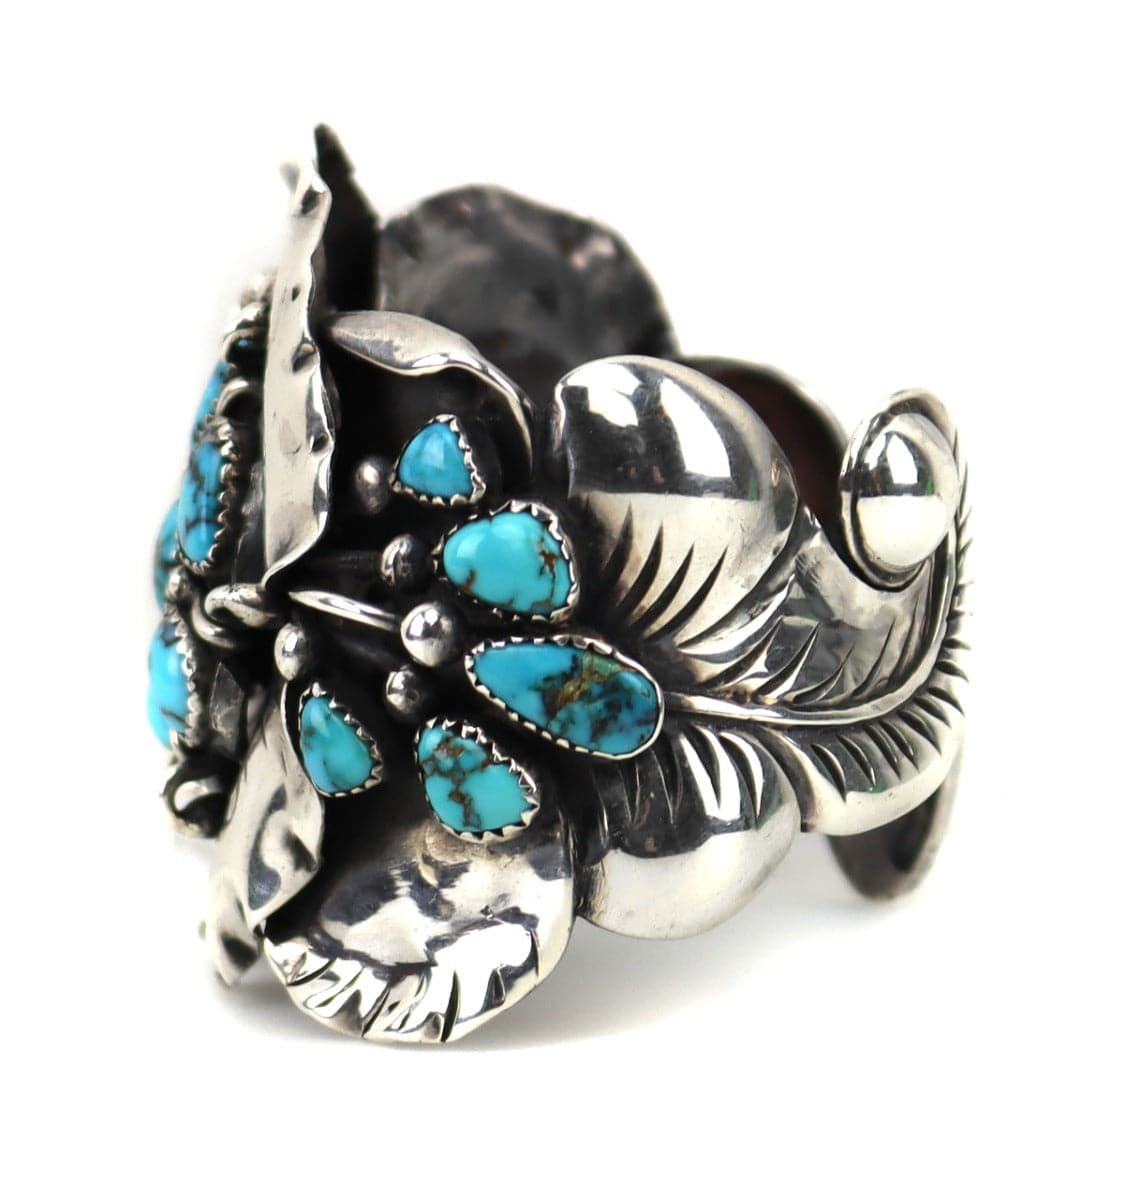 Frank Patania Sr. (1899-1964) and Thunderbird Shop - Burnham Turquoise and Sterling Silver Cuff Bracelet with Floral Design c. 1940-50s, size 6.25 (J91699-0322-004) 3